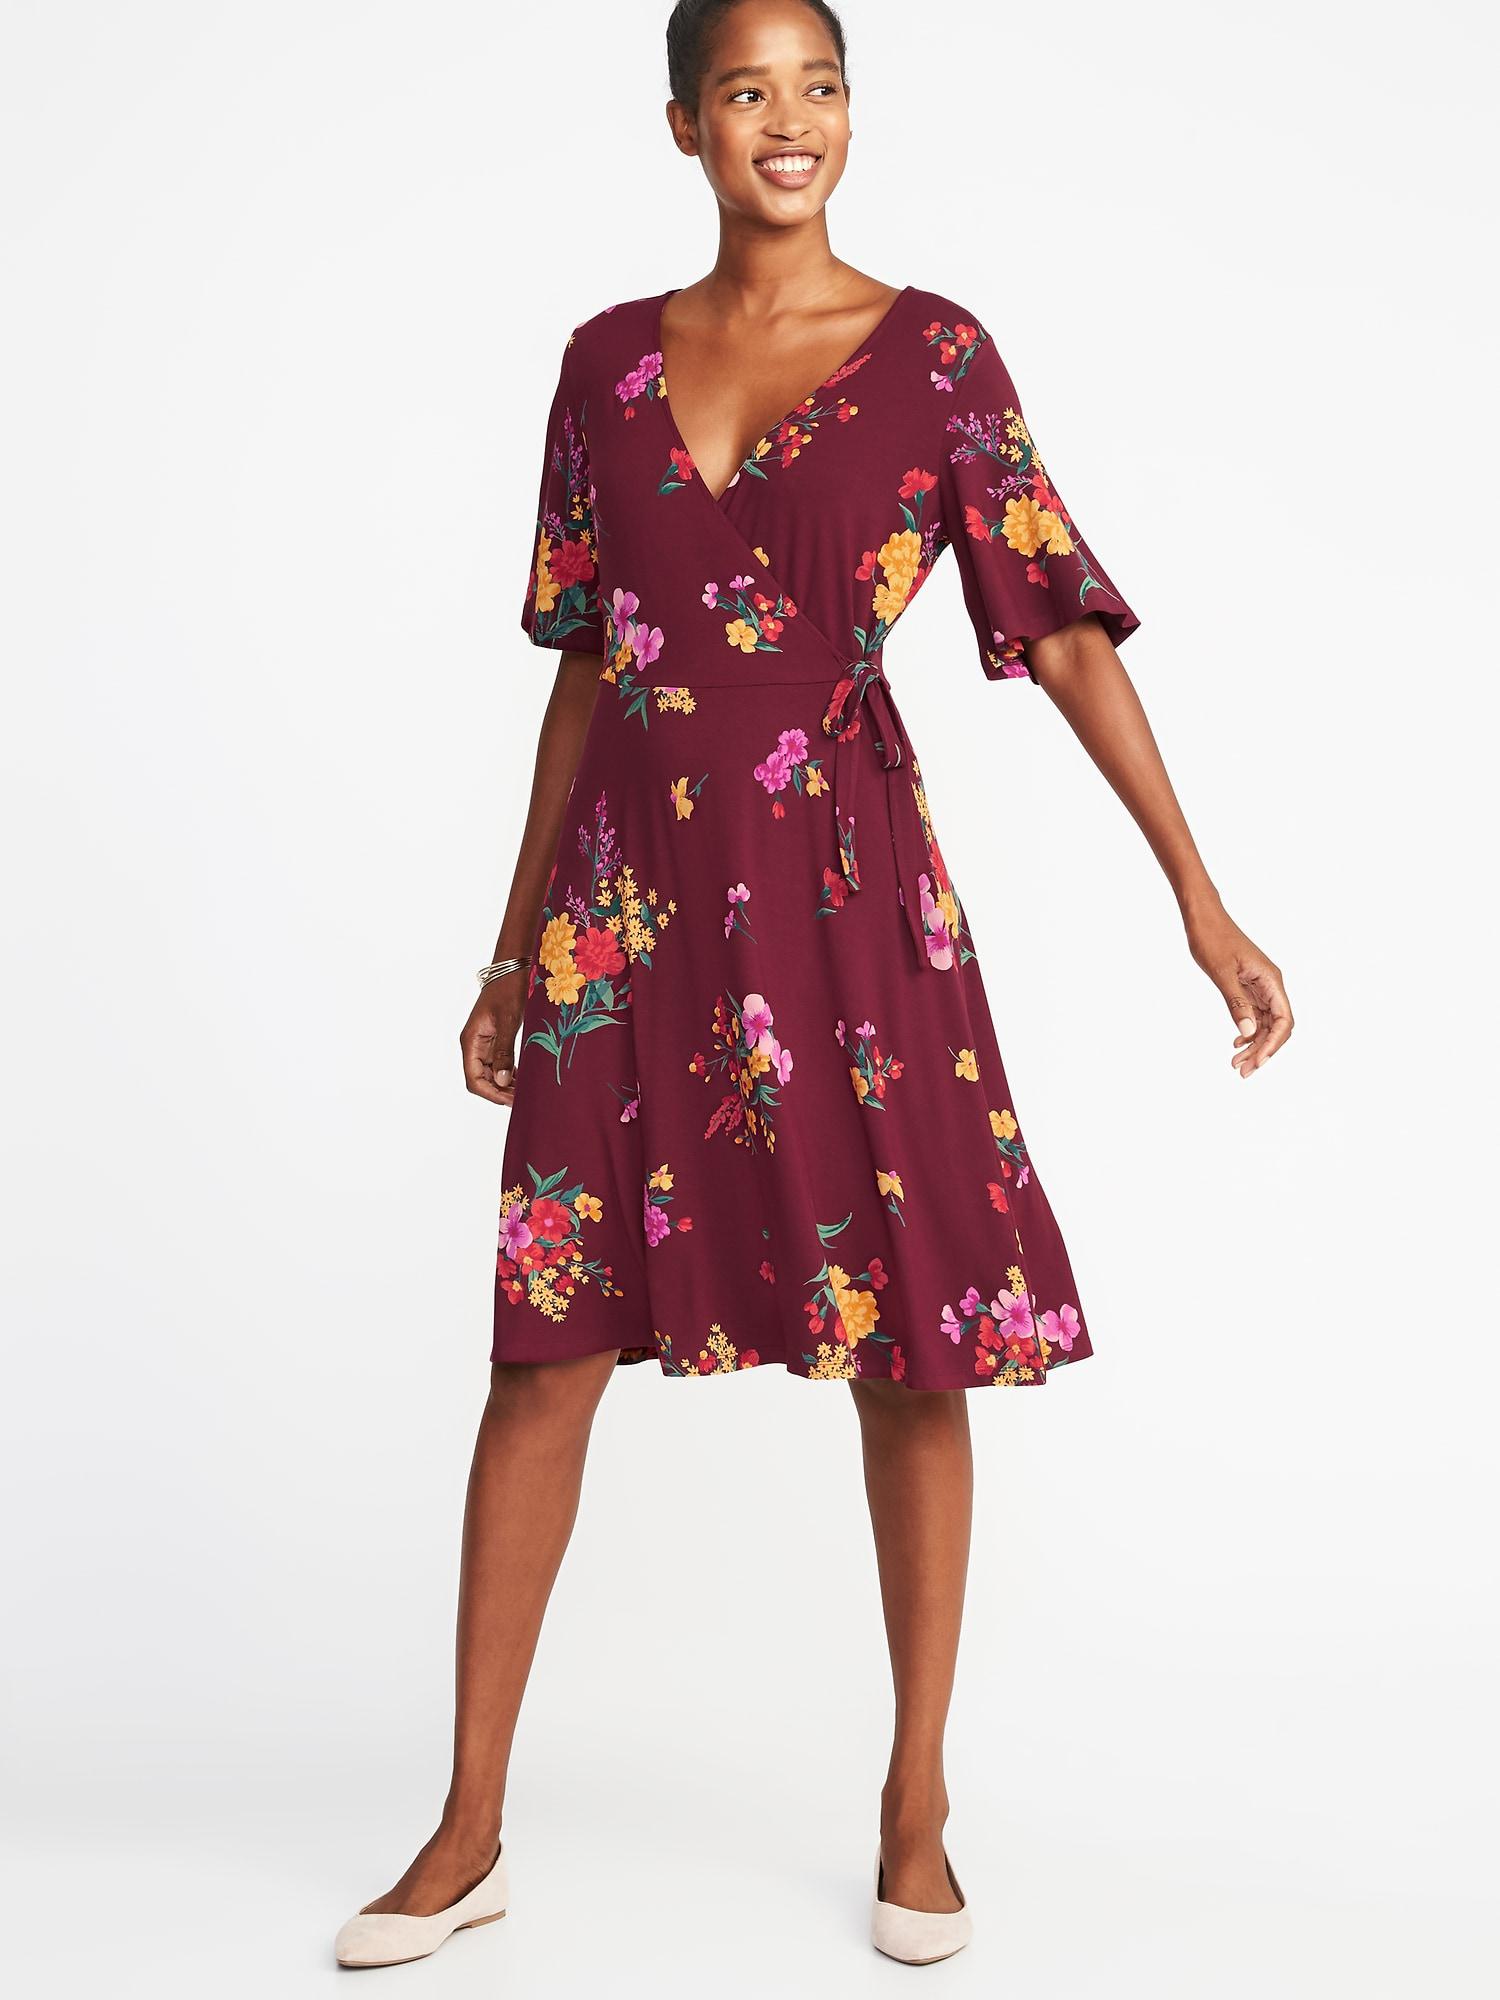 Old Navy Maroon Floral Dress Clearance ...